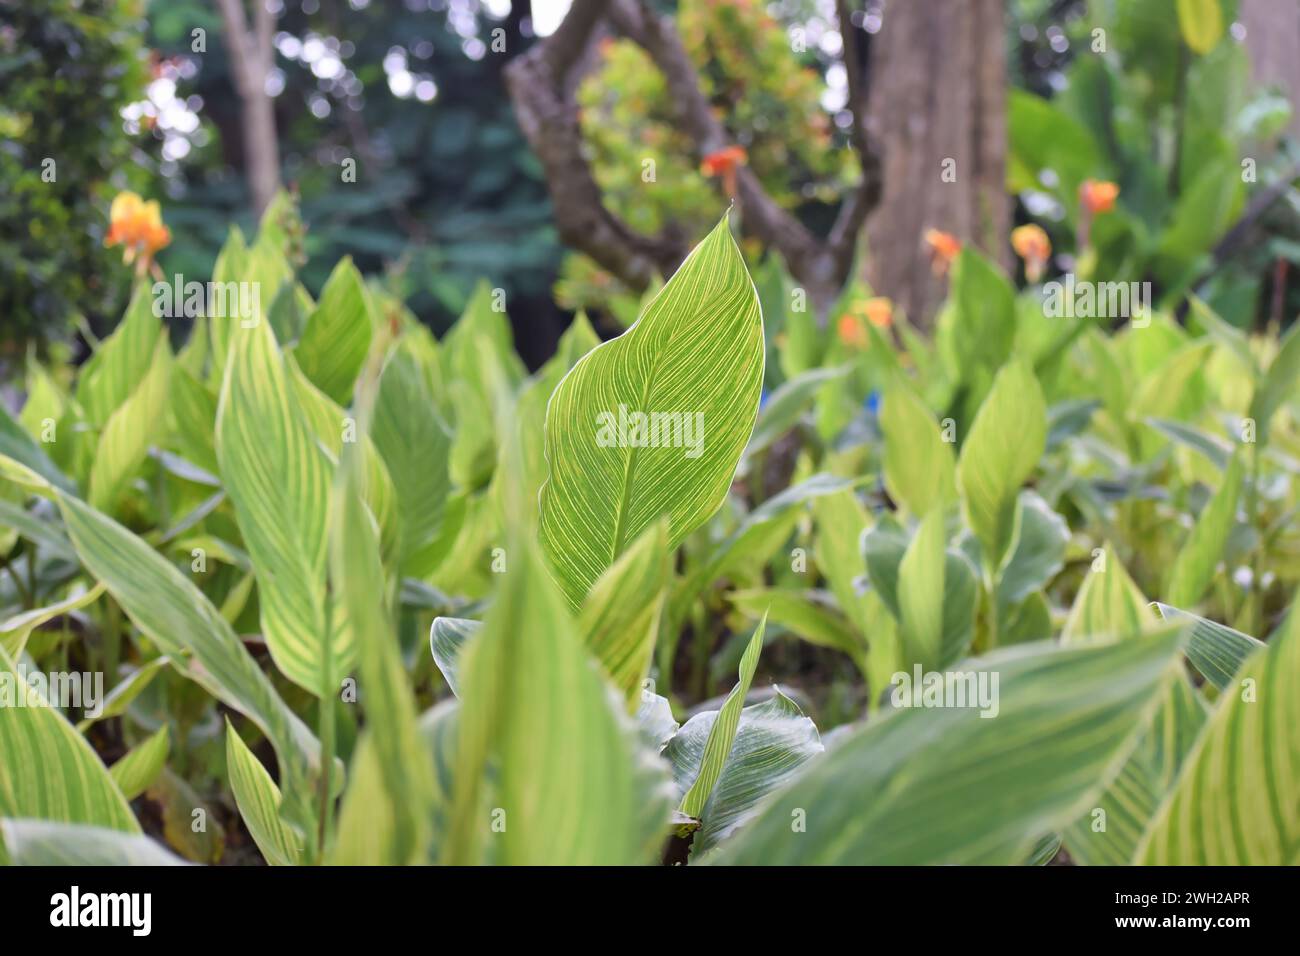 Panna Paniculata green foliage with yellow strip leaves on garden with blur background Stock Photo